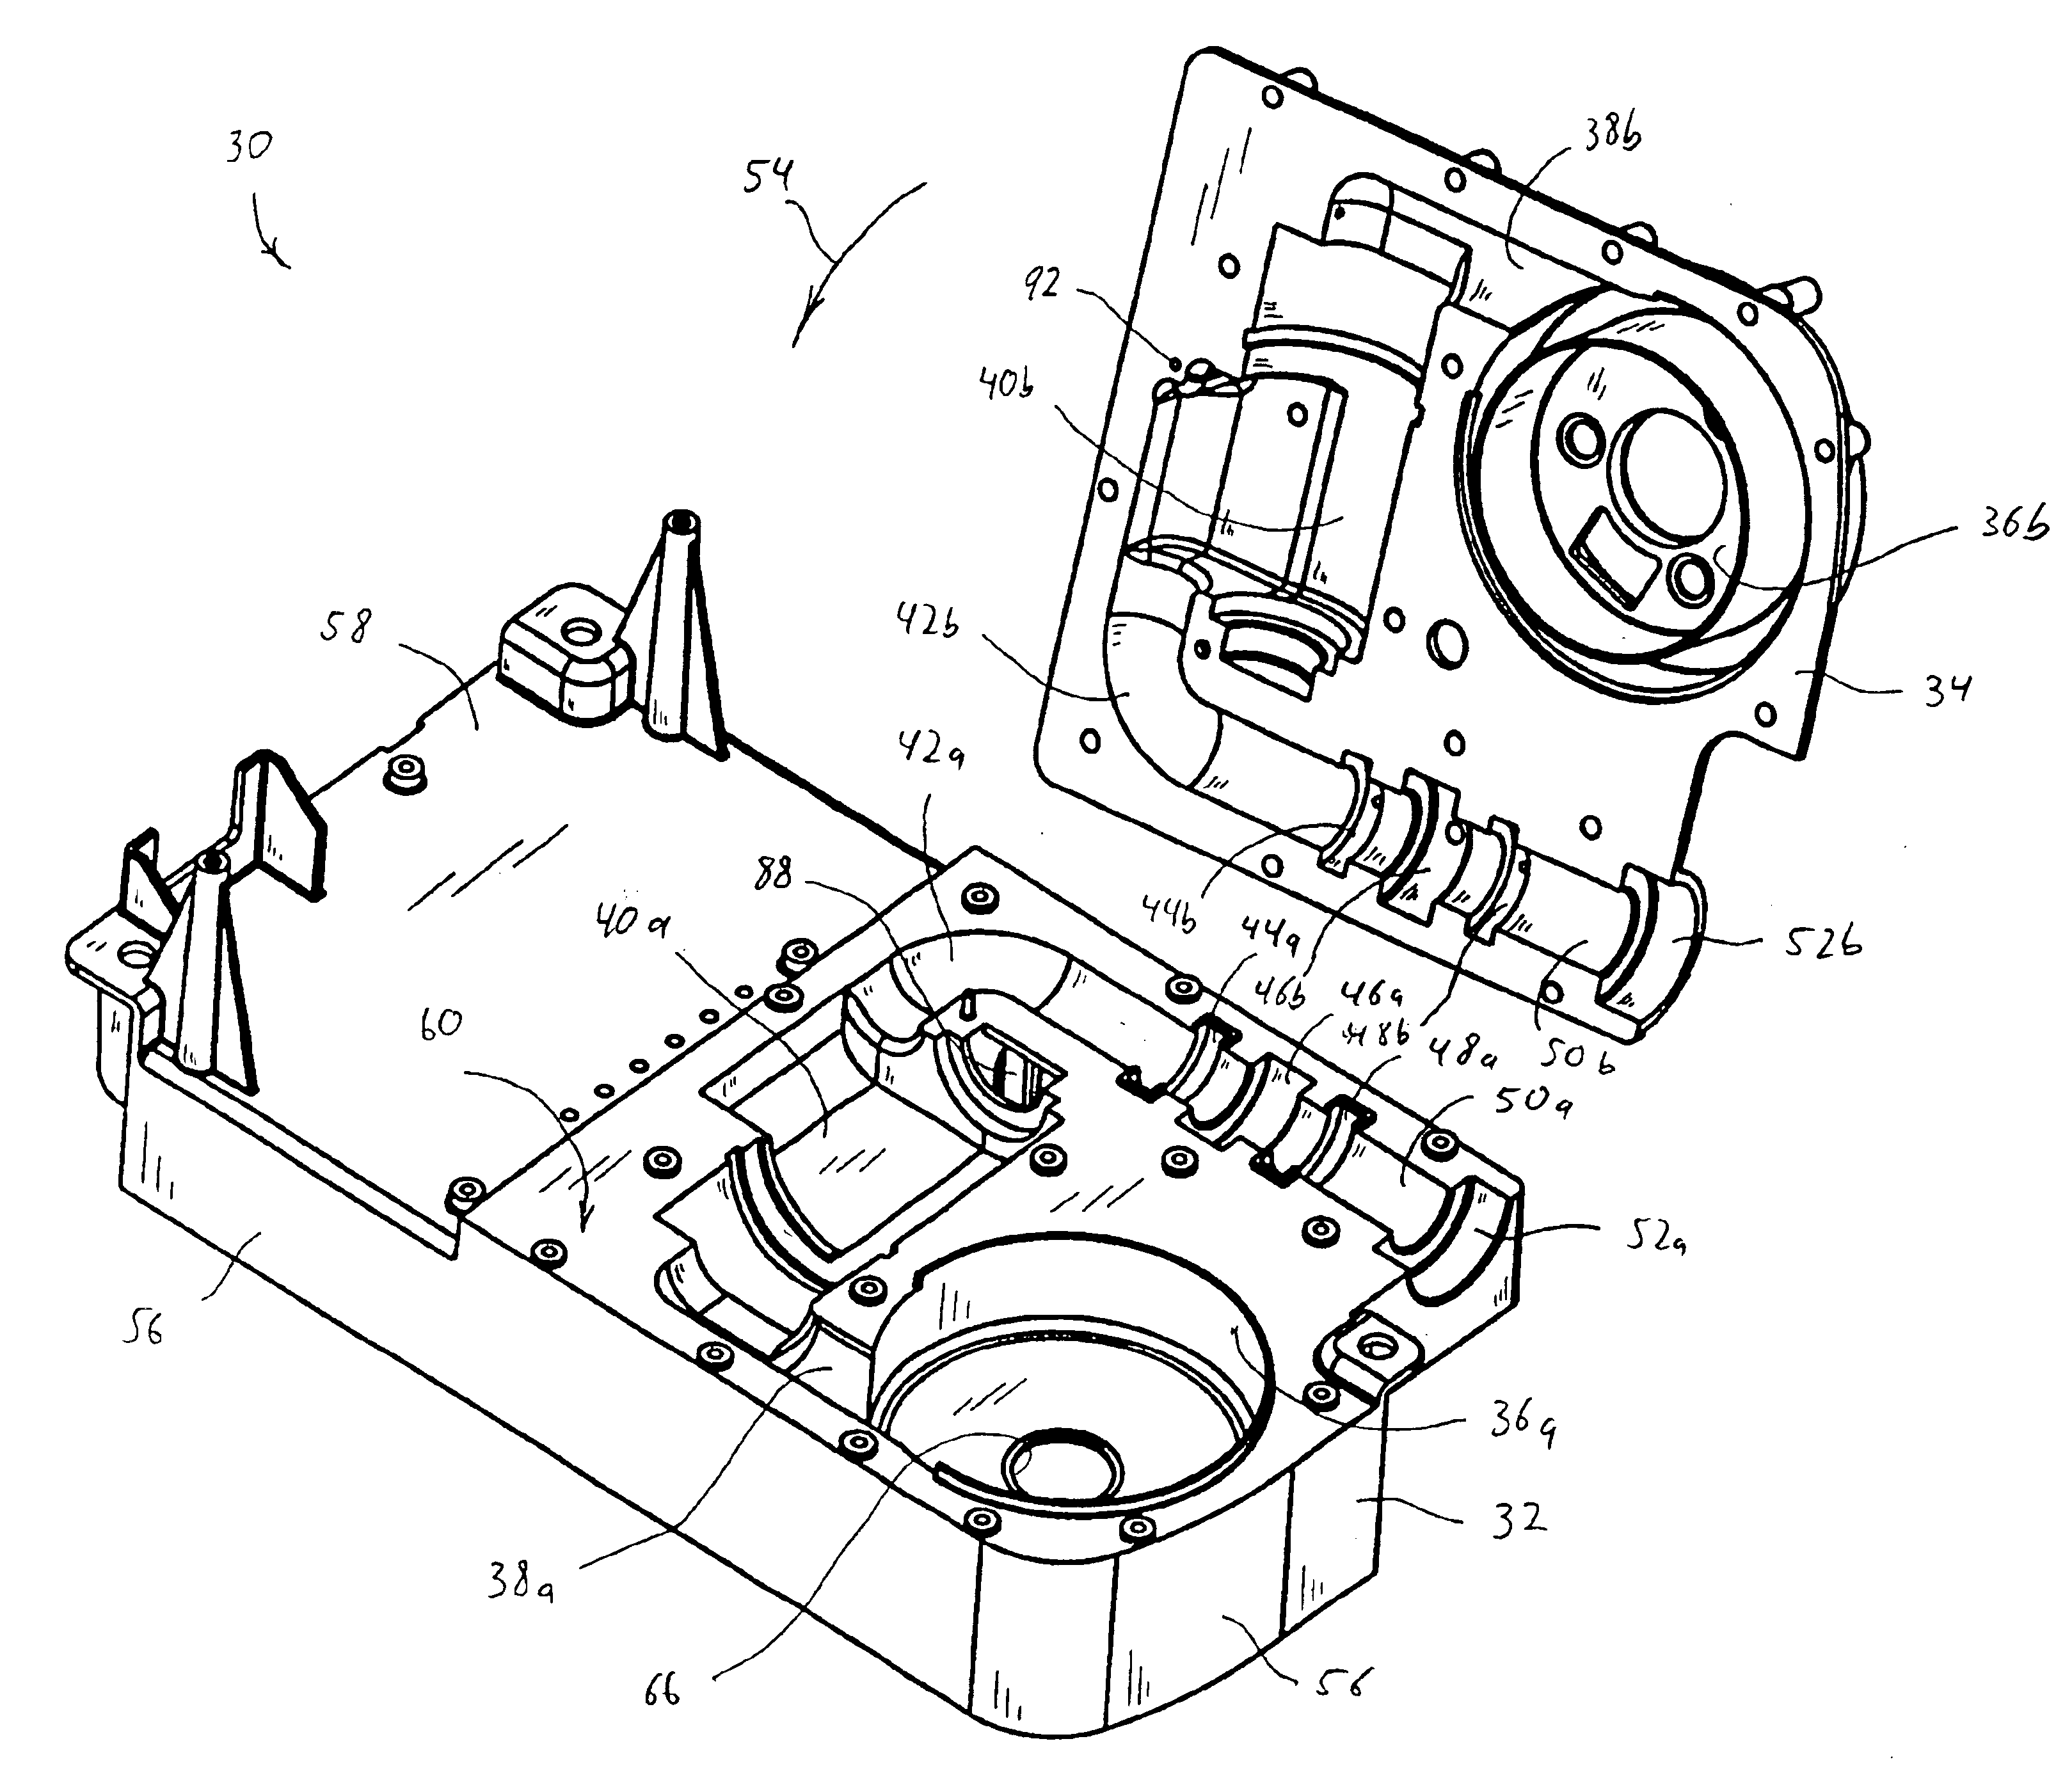 Pressure support system having a two-piece assembly